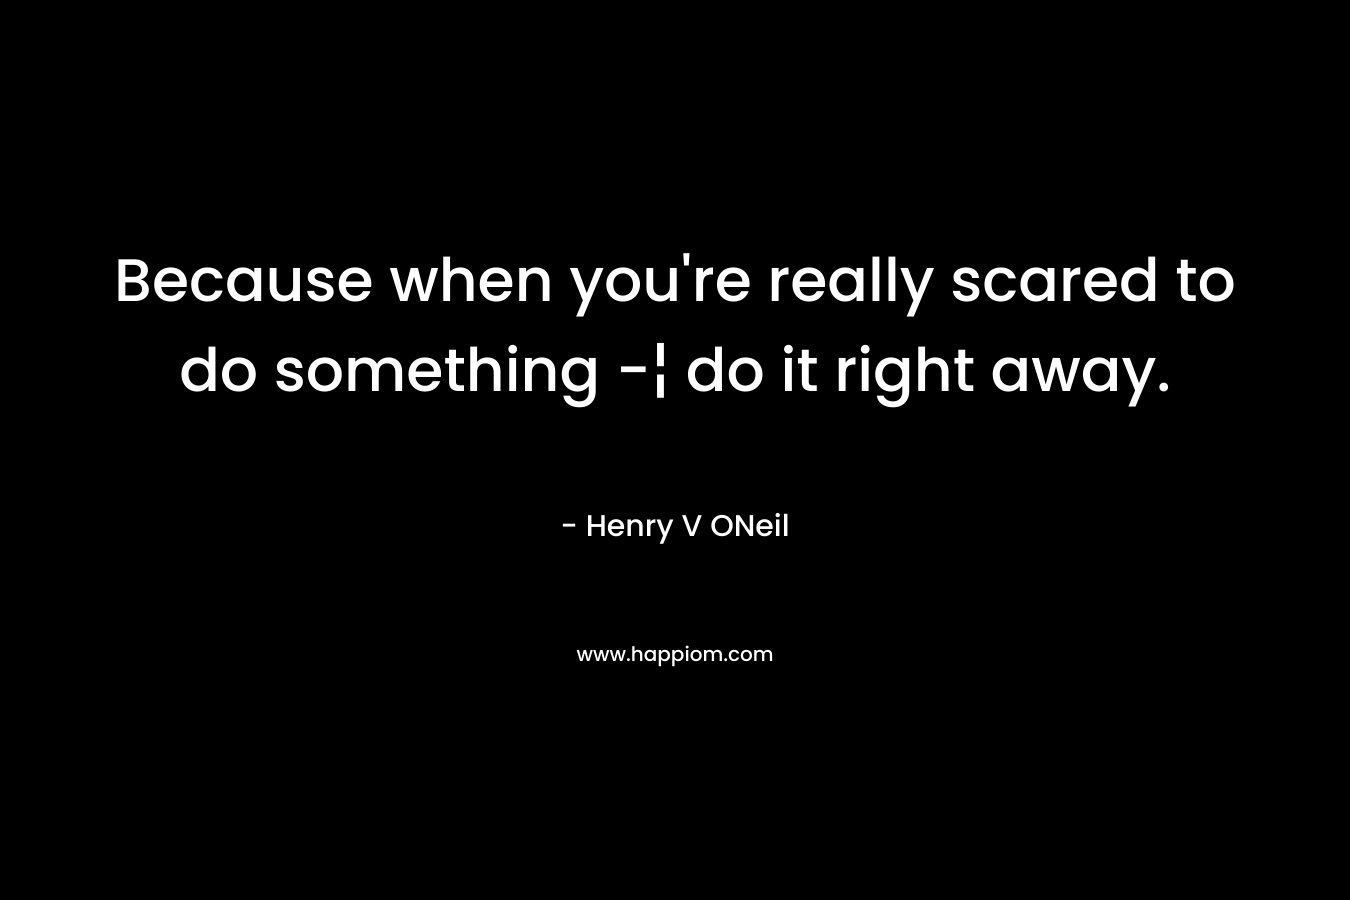 Because when you're really scared to do something -¦ do it right away.